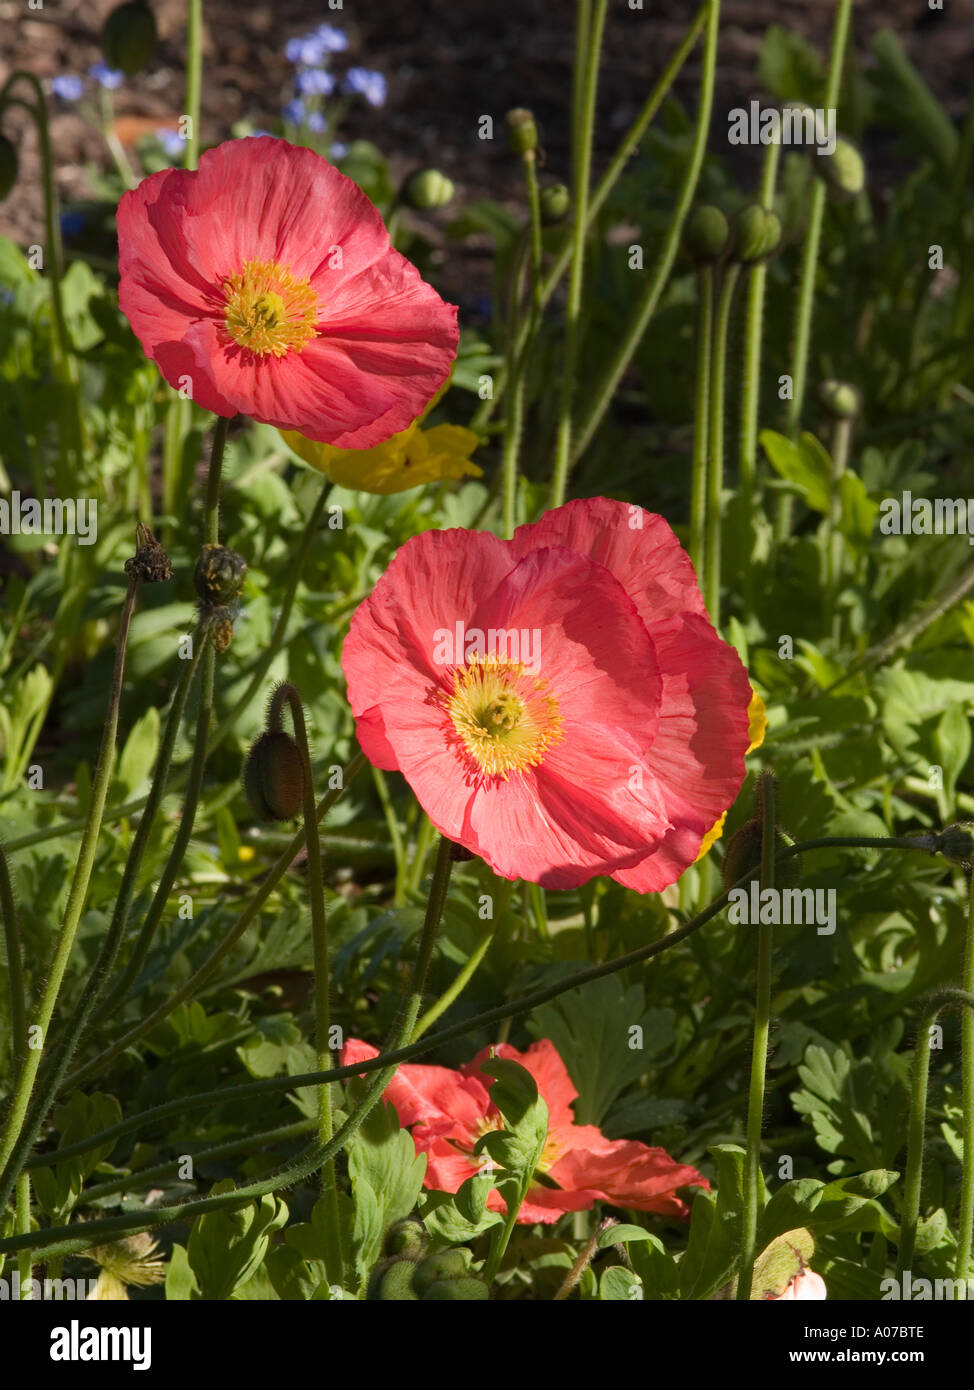 Close up of 2 sunlit deep pink Papaver Iceland poppy flowers Stock Photo